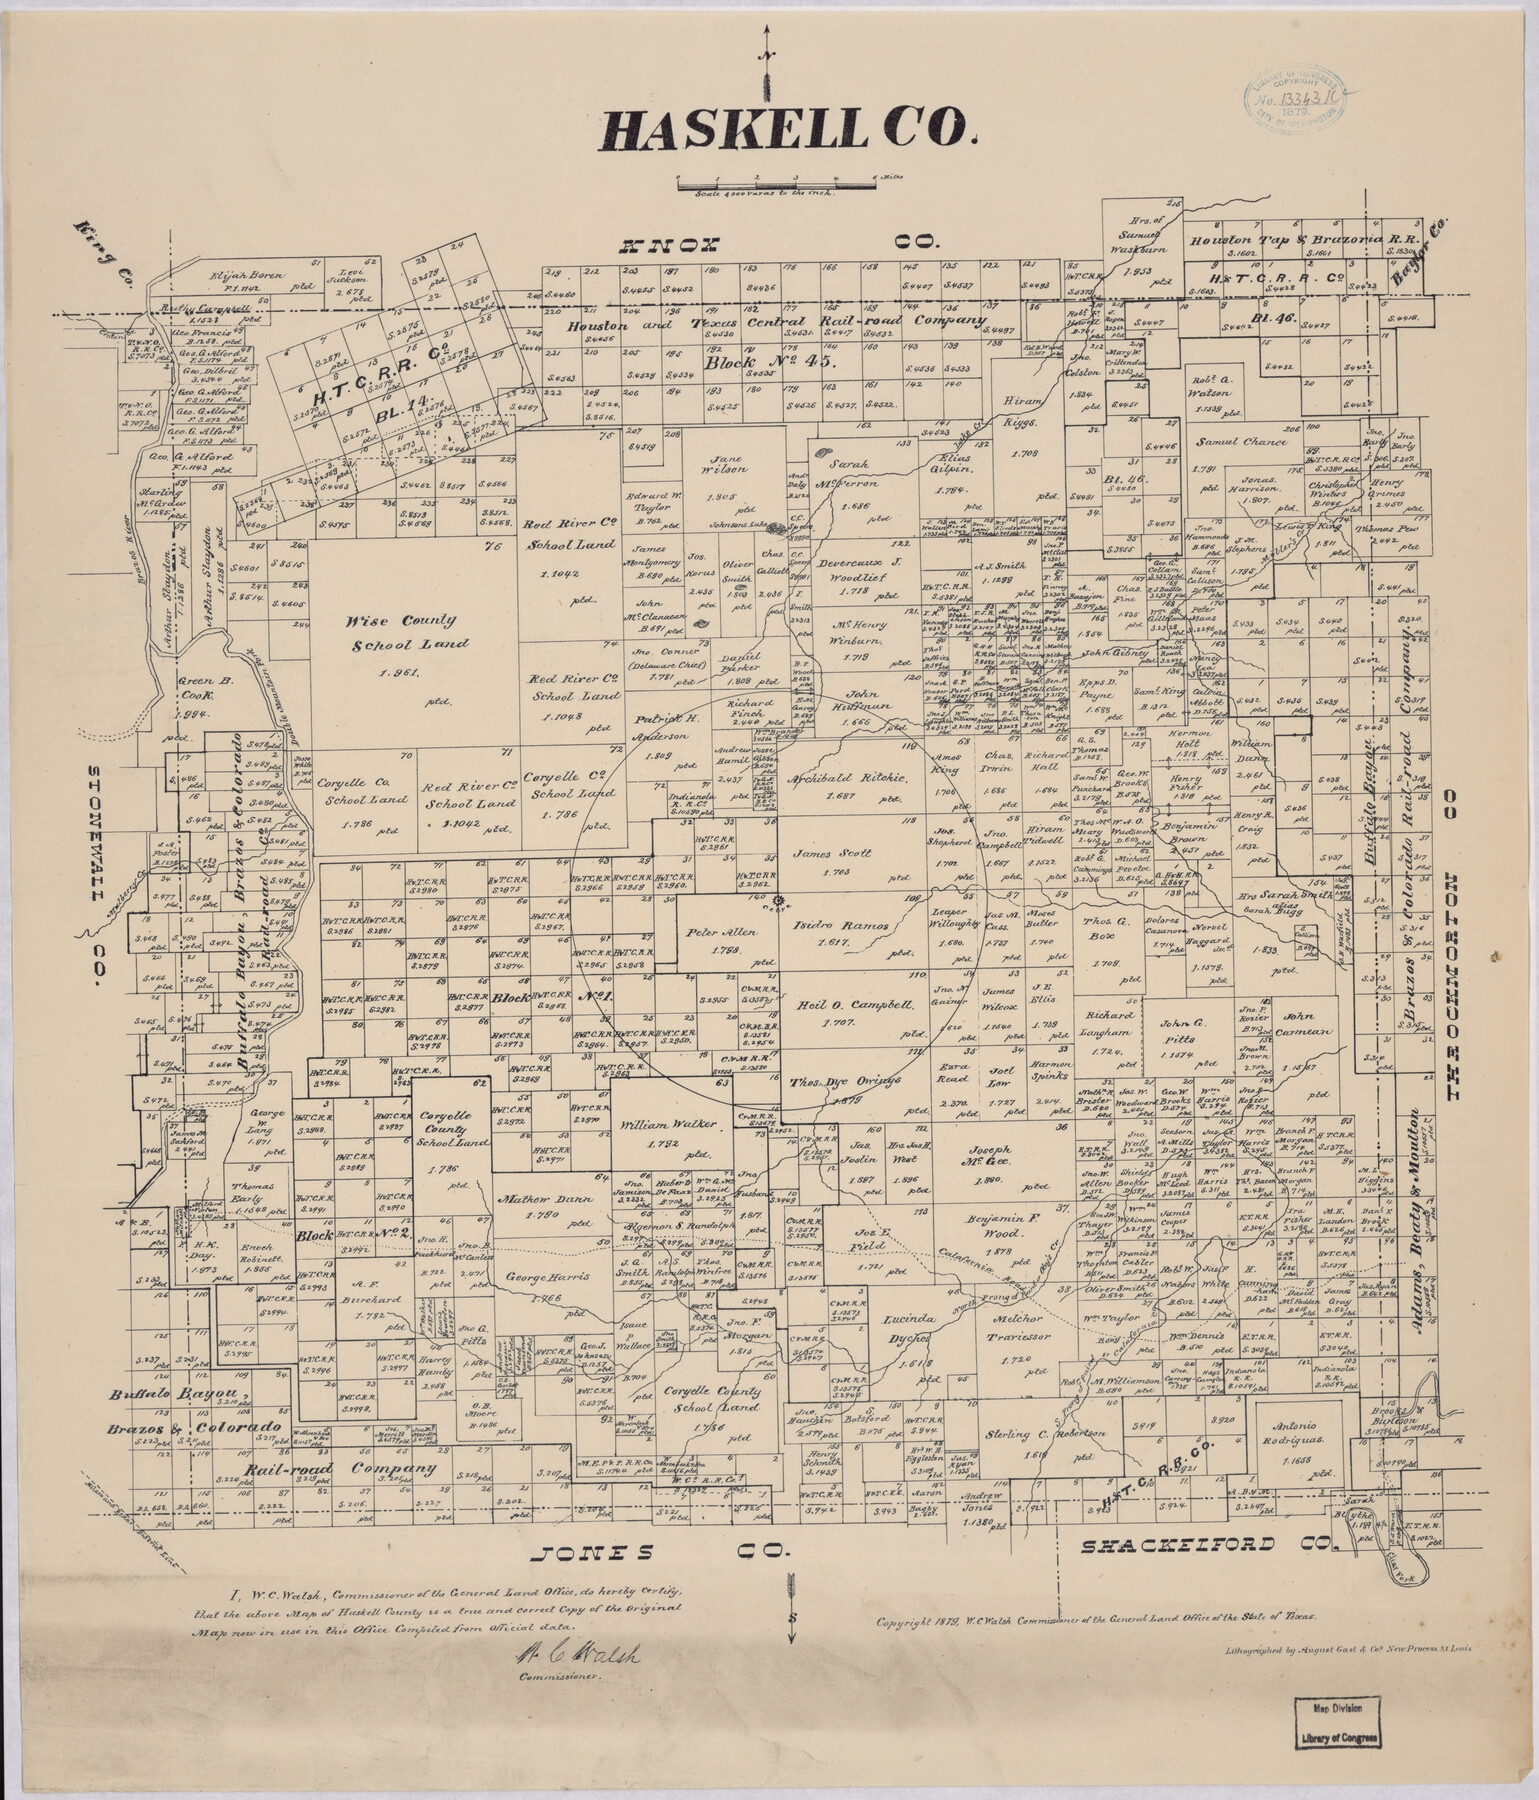 88951, Haskell Co[unty], Library of Congress